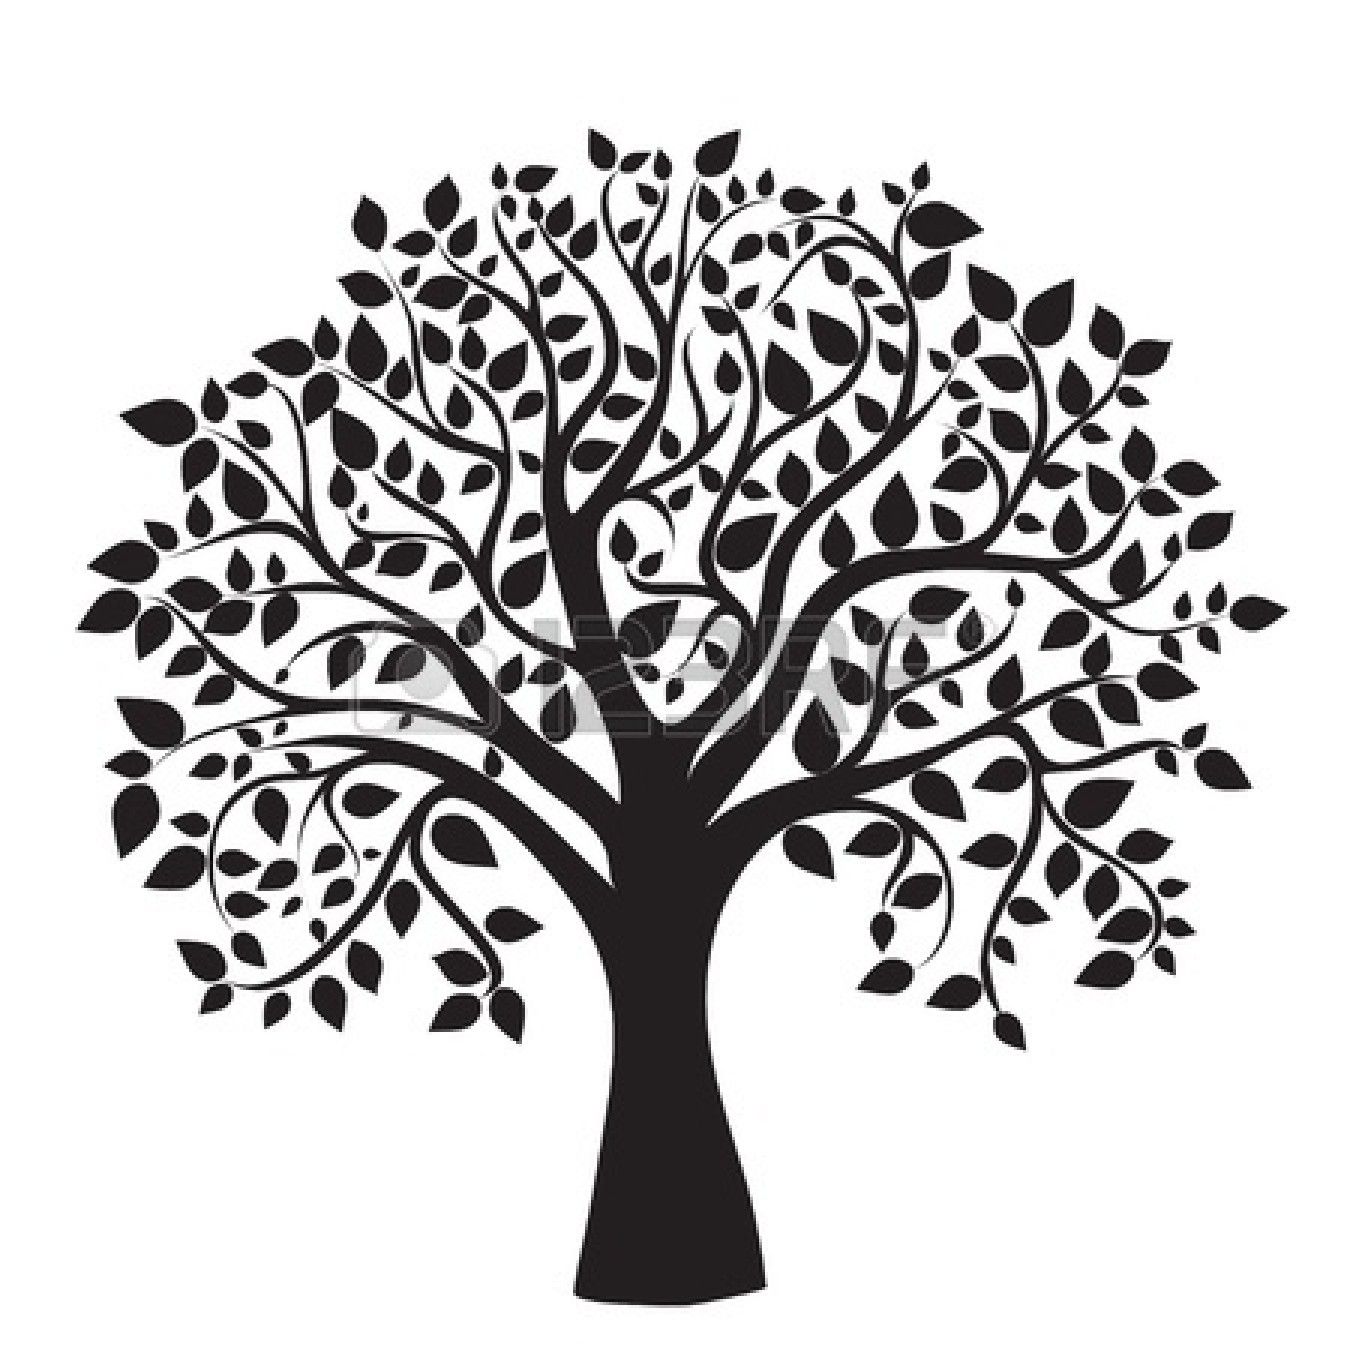 clipart tree black and white